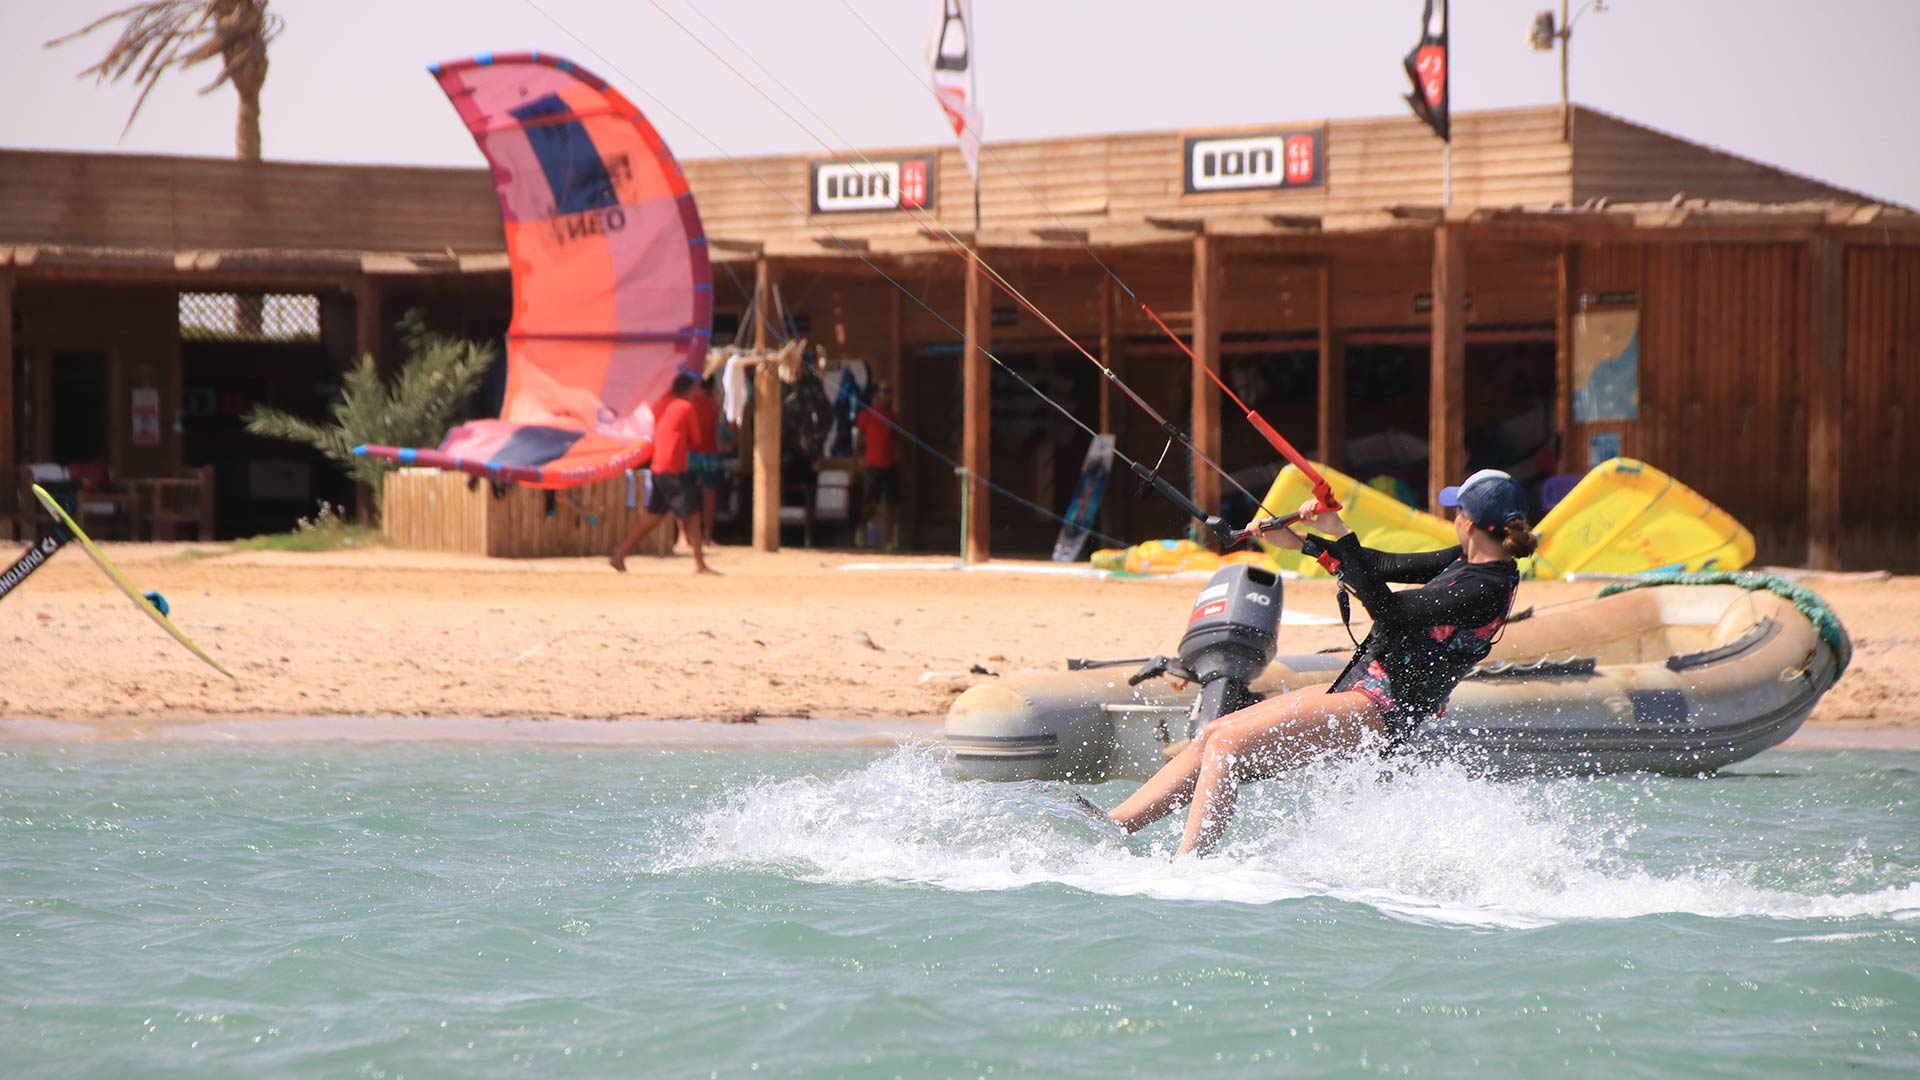 kitesurfer is arriving in front to the Ion Club Safaga Center doing kitesurfing